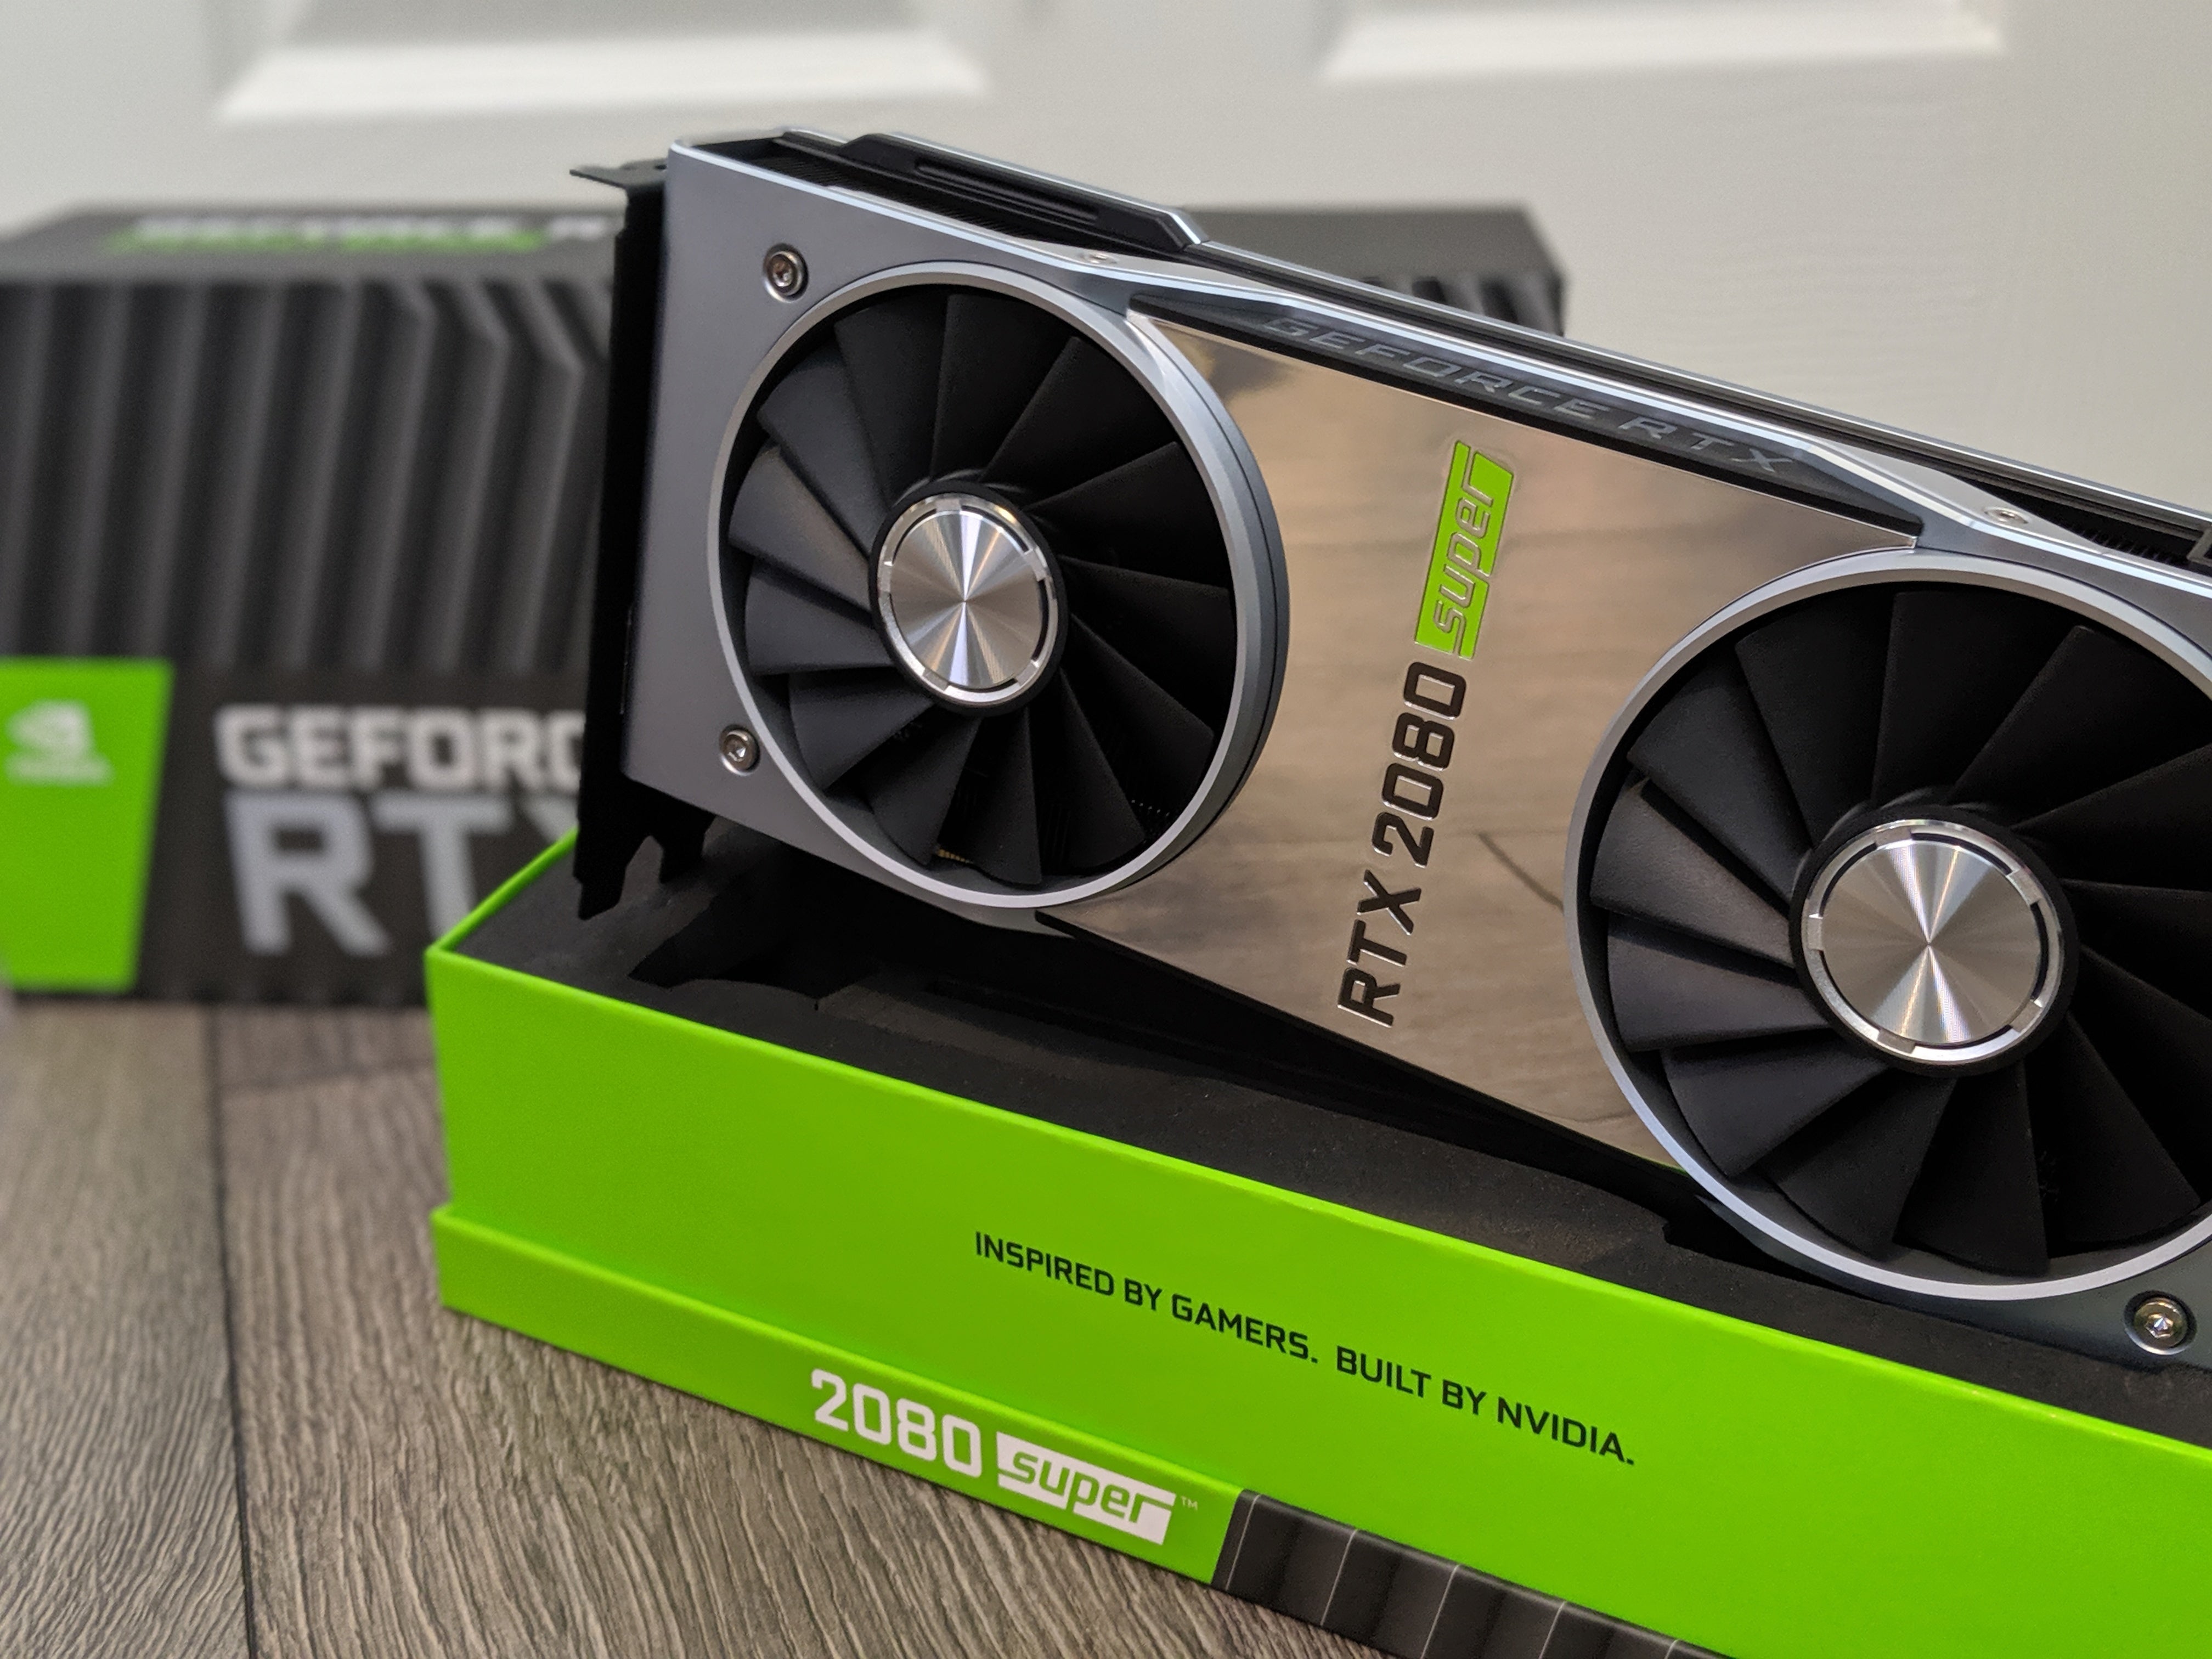 Image for The Nvidia GeForce RTX 2080 Super is a decent upgrade from its predecessor, but it's not as impressive as the other Super cards